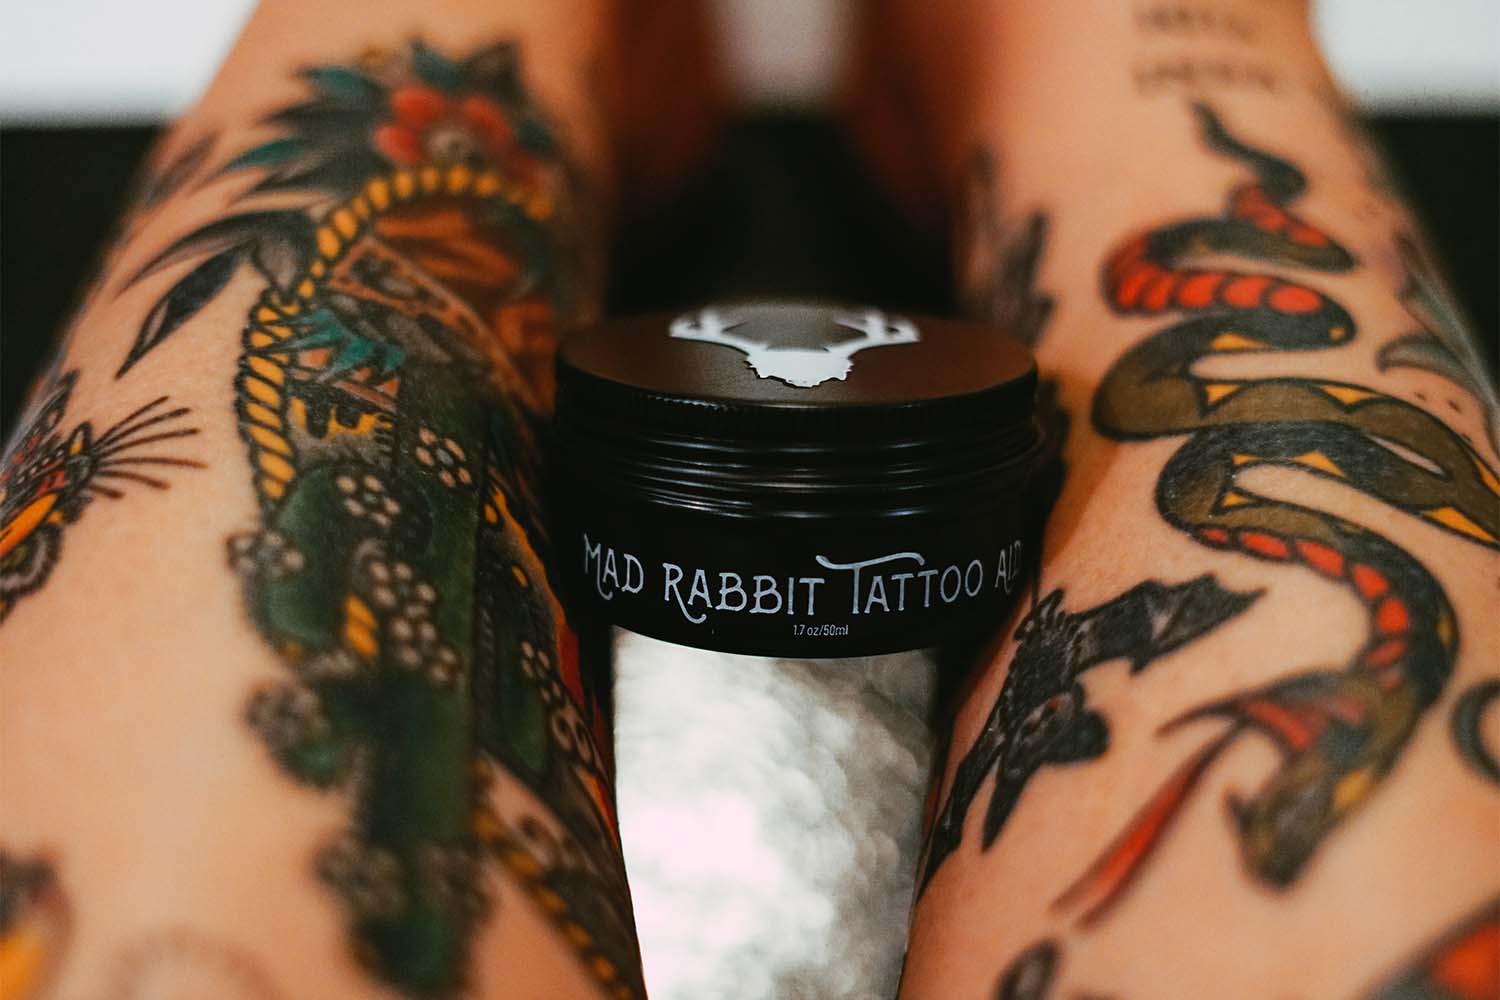 TattCare New Zealand | Natural tattoo aftercare products